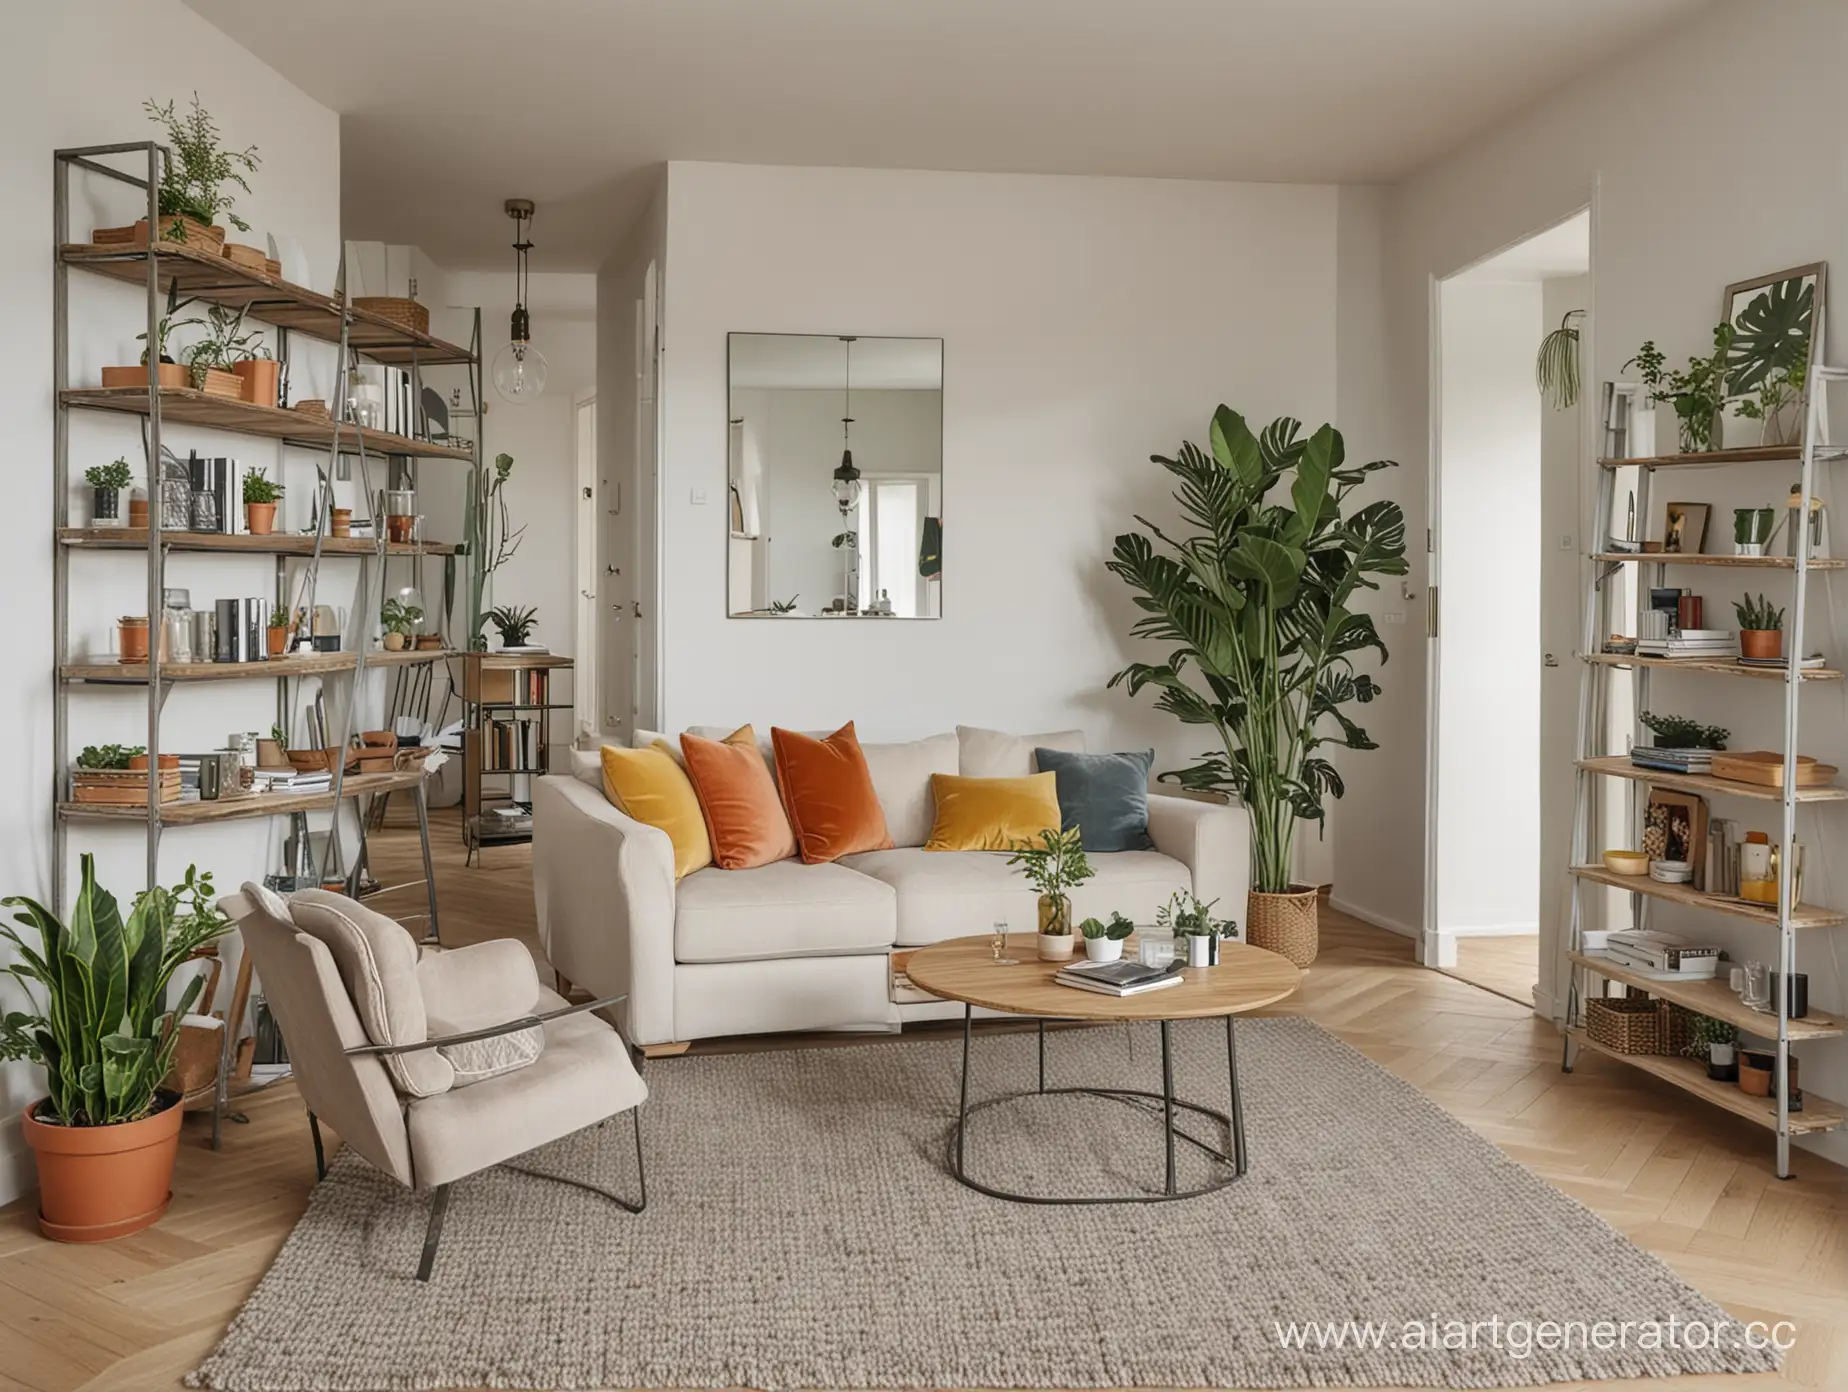 LIVING ROOM WITH A TABLE STAIRS SOFA WARDROBE SHELVES RUG  A PLANT,  A  MIRROW, ONE ARMCHAIR, A BOTTLE, A LAMP